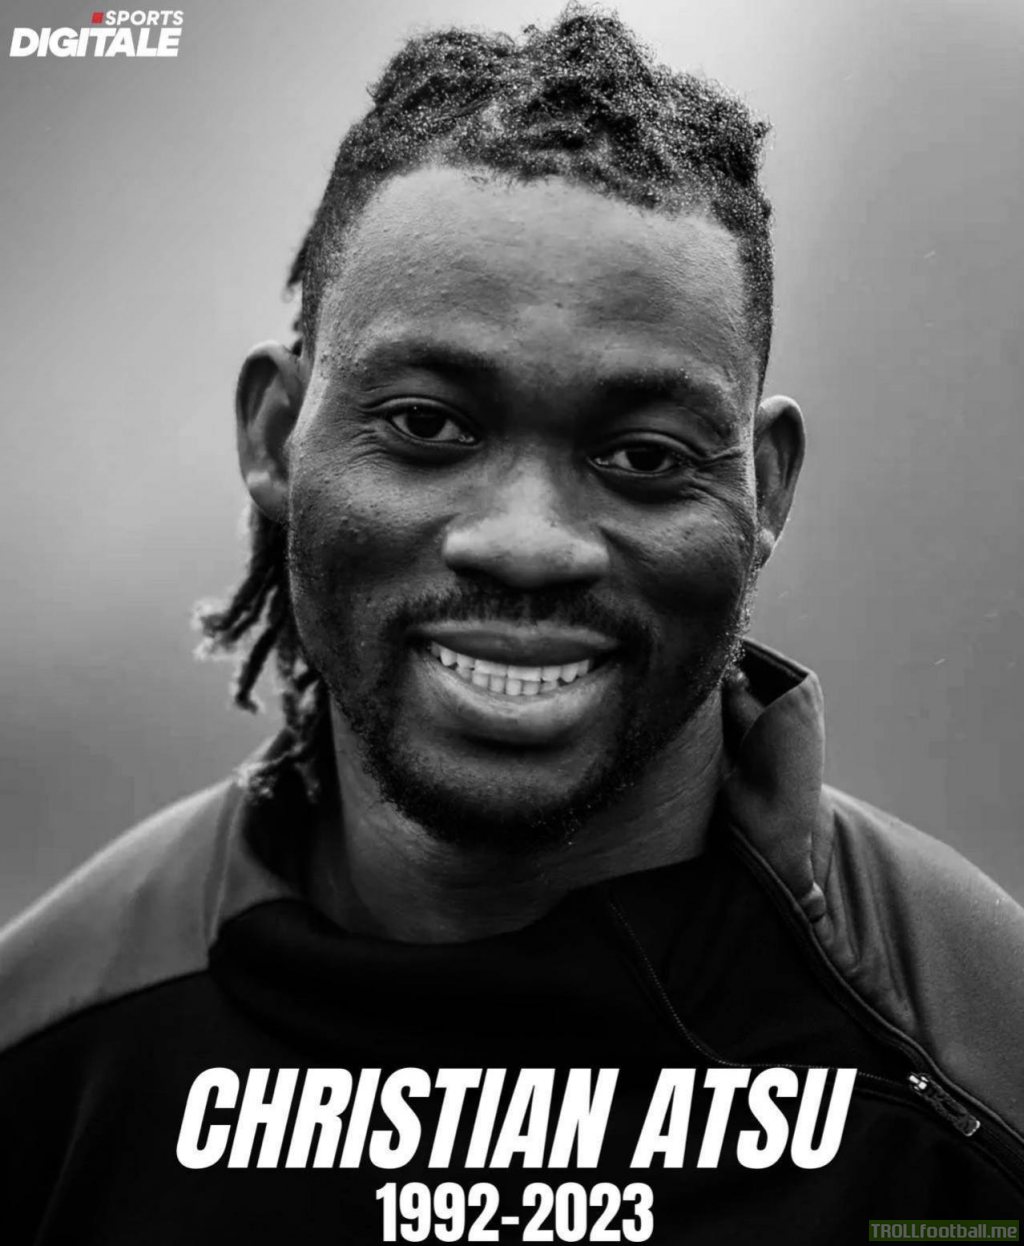 Was Voted Best Player at the 2015 AFCON Won the Nissan Goal of the tournament at the 2015 AFCON Represented Ghana at the 2015,2017 and 2019 AFCON and 2014 World Cup Son of the soil — Rest In Peace Christian Atsu